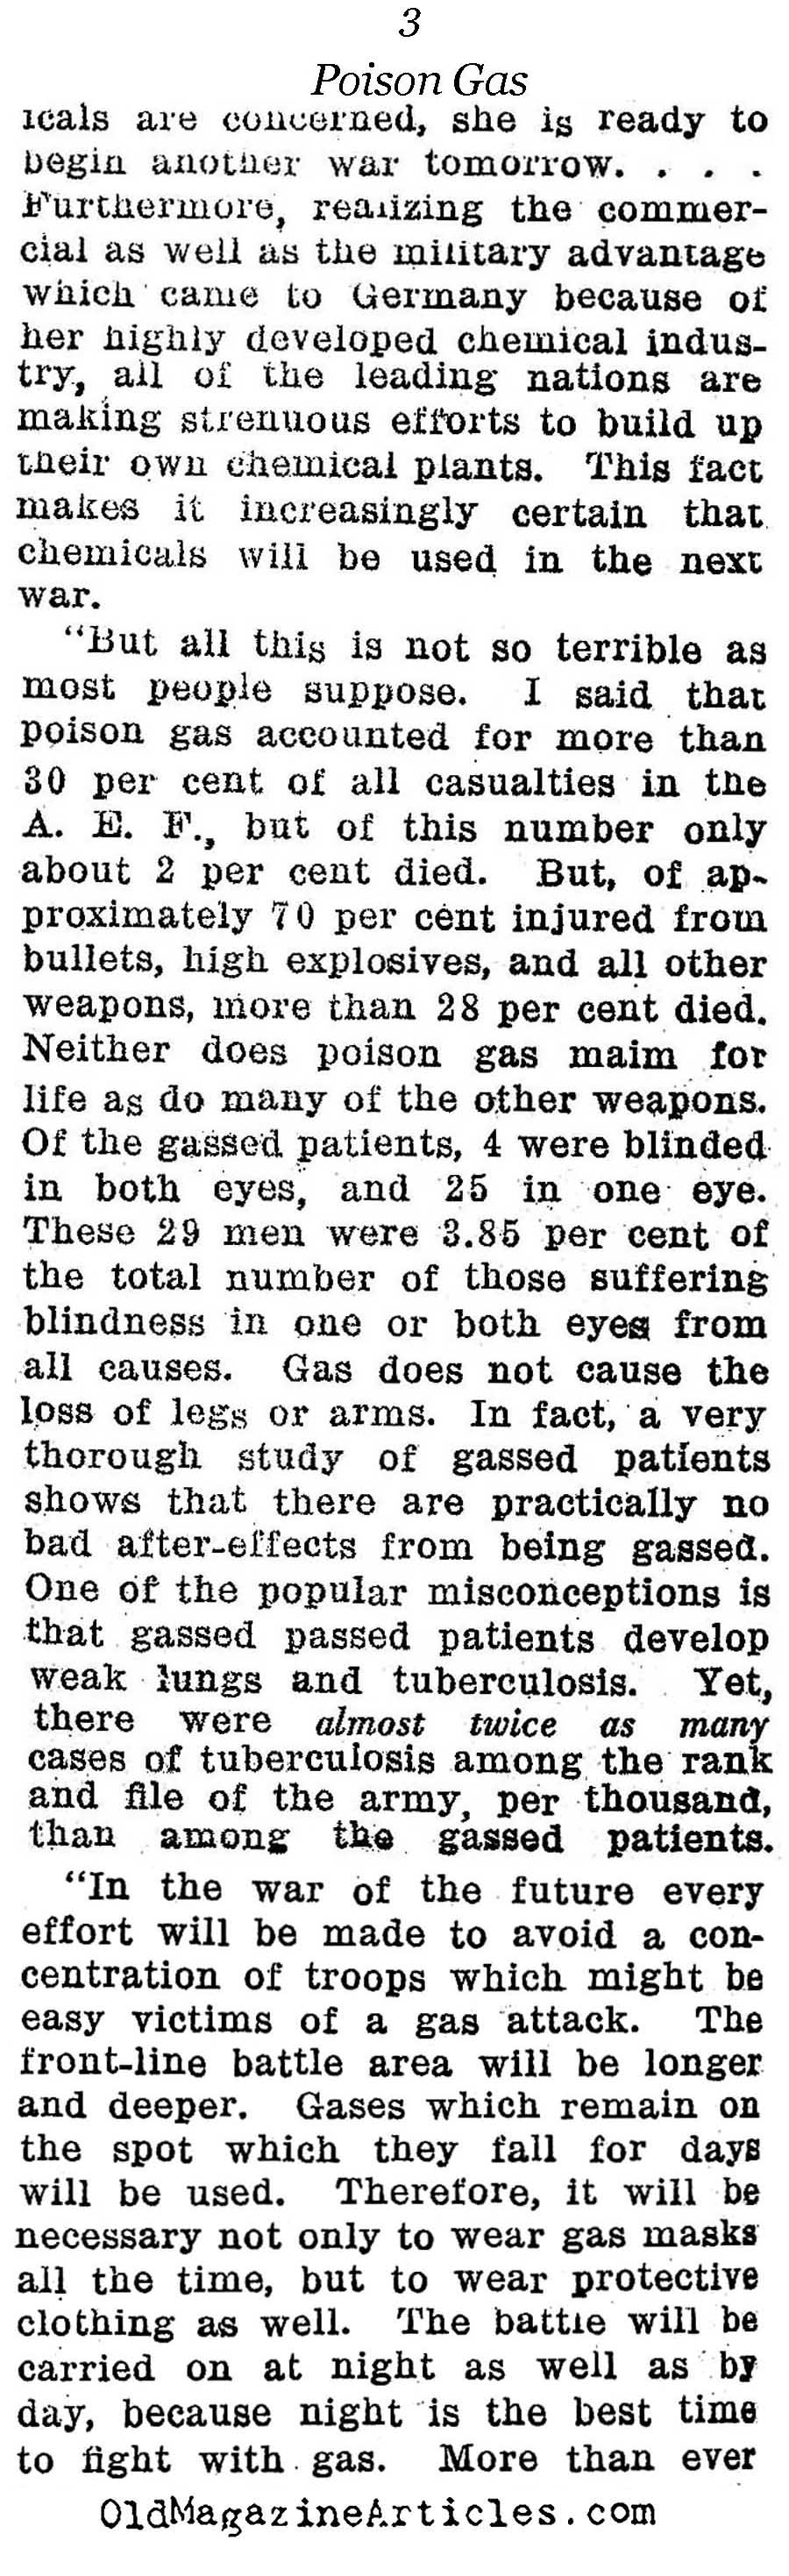 In Defense Of Chemical Warfare (Reader's Digest, 1923)